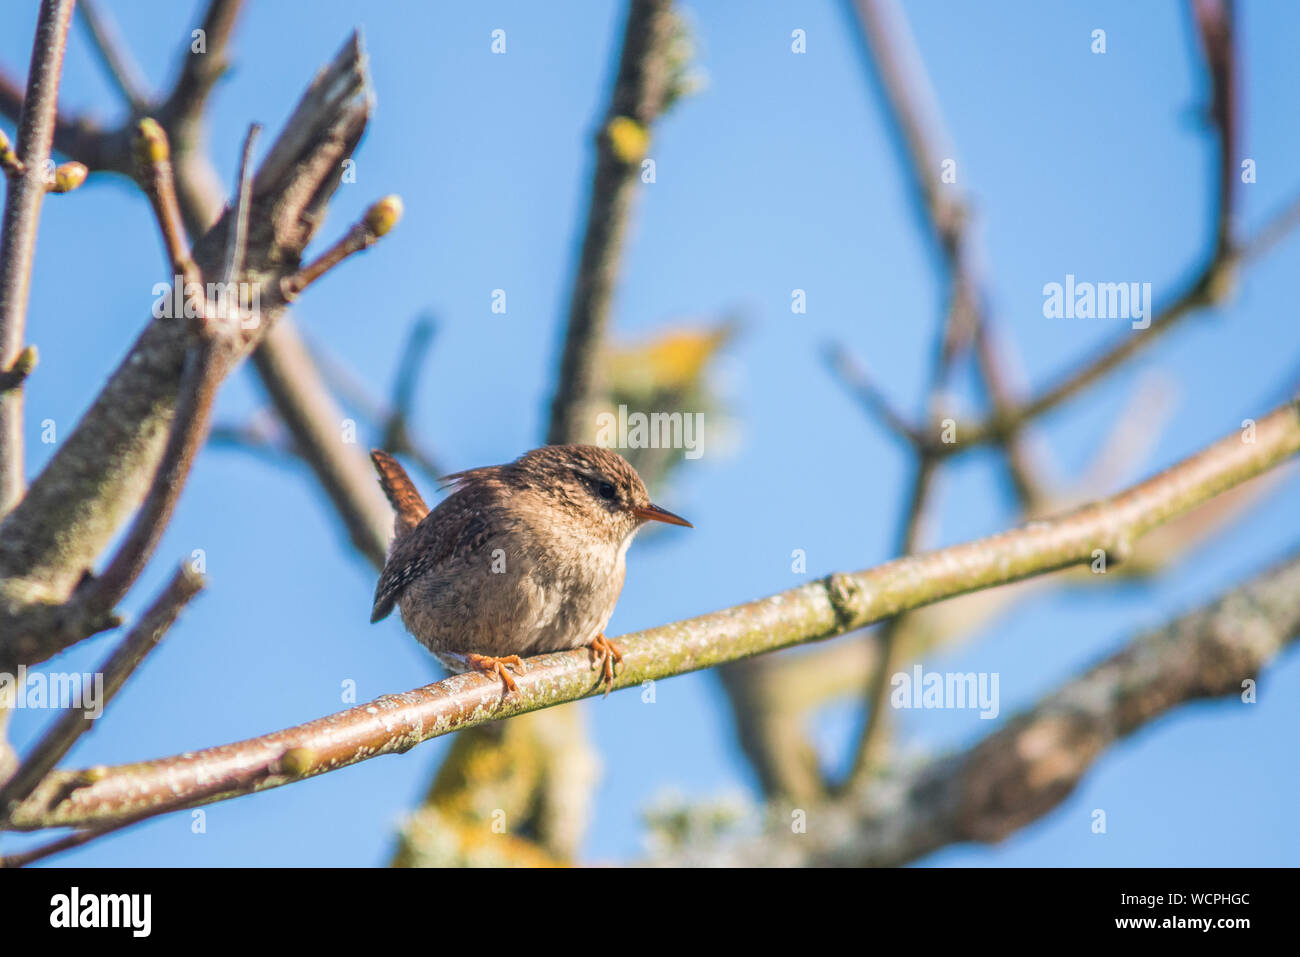 Wren perched on tree branch, close up Stock Photo